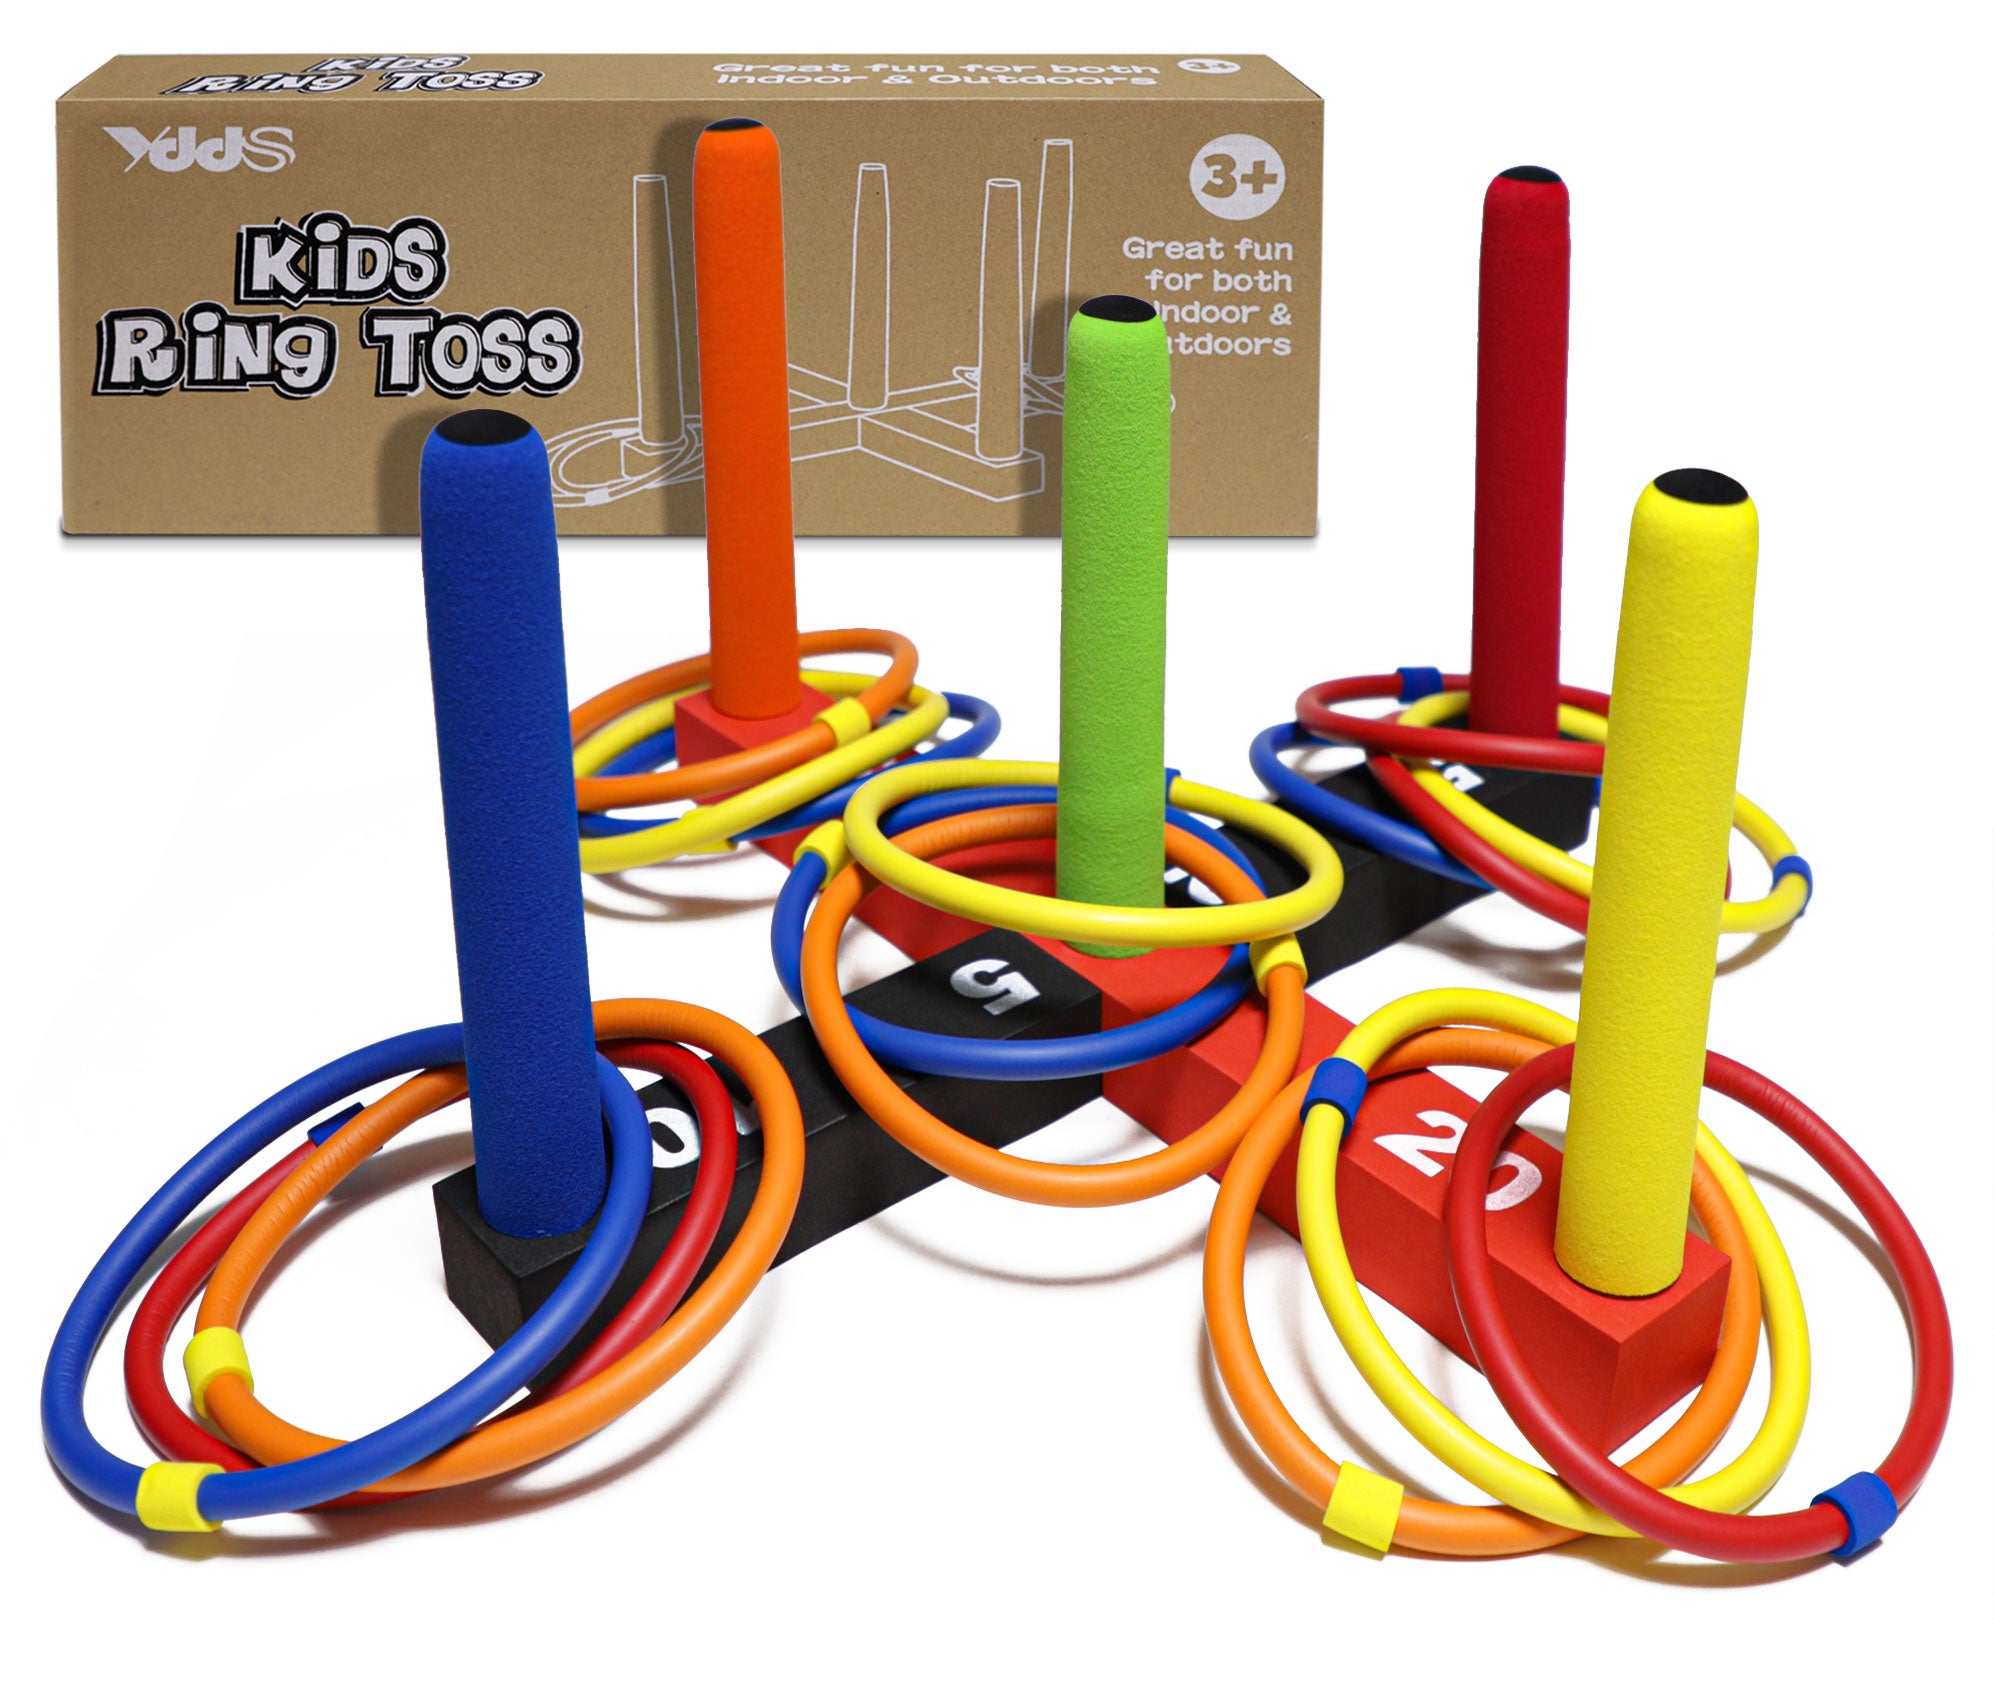 Franklin Sports Kids Ring Toss - Great for Kids - Indoor Outdoor Use -  Durable Wood Construction - Includes Target and Rings | Franklin Sports